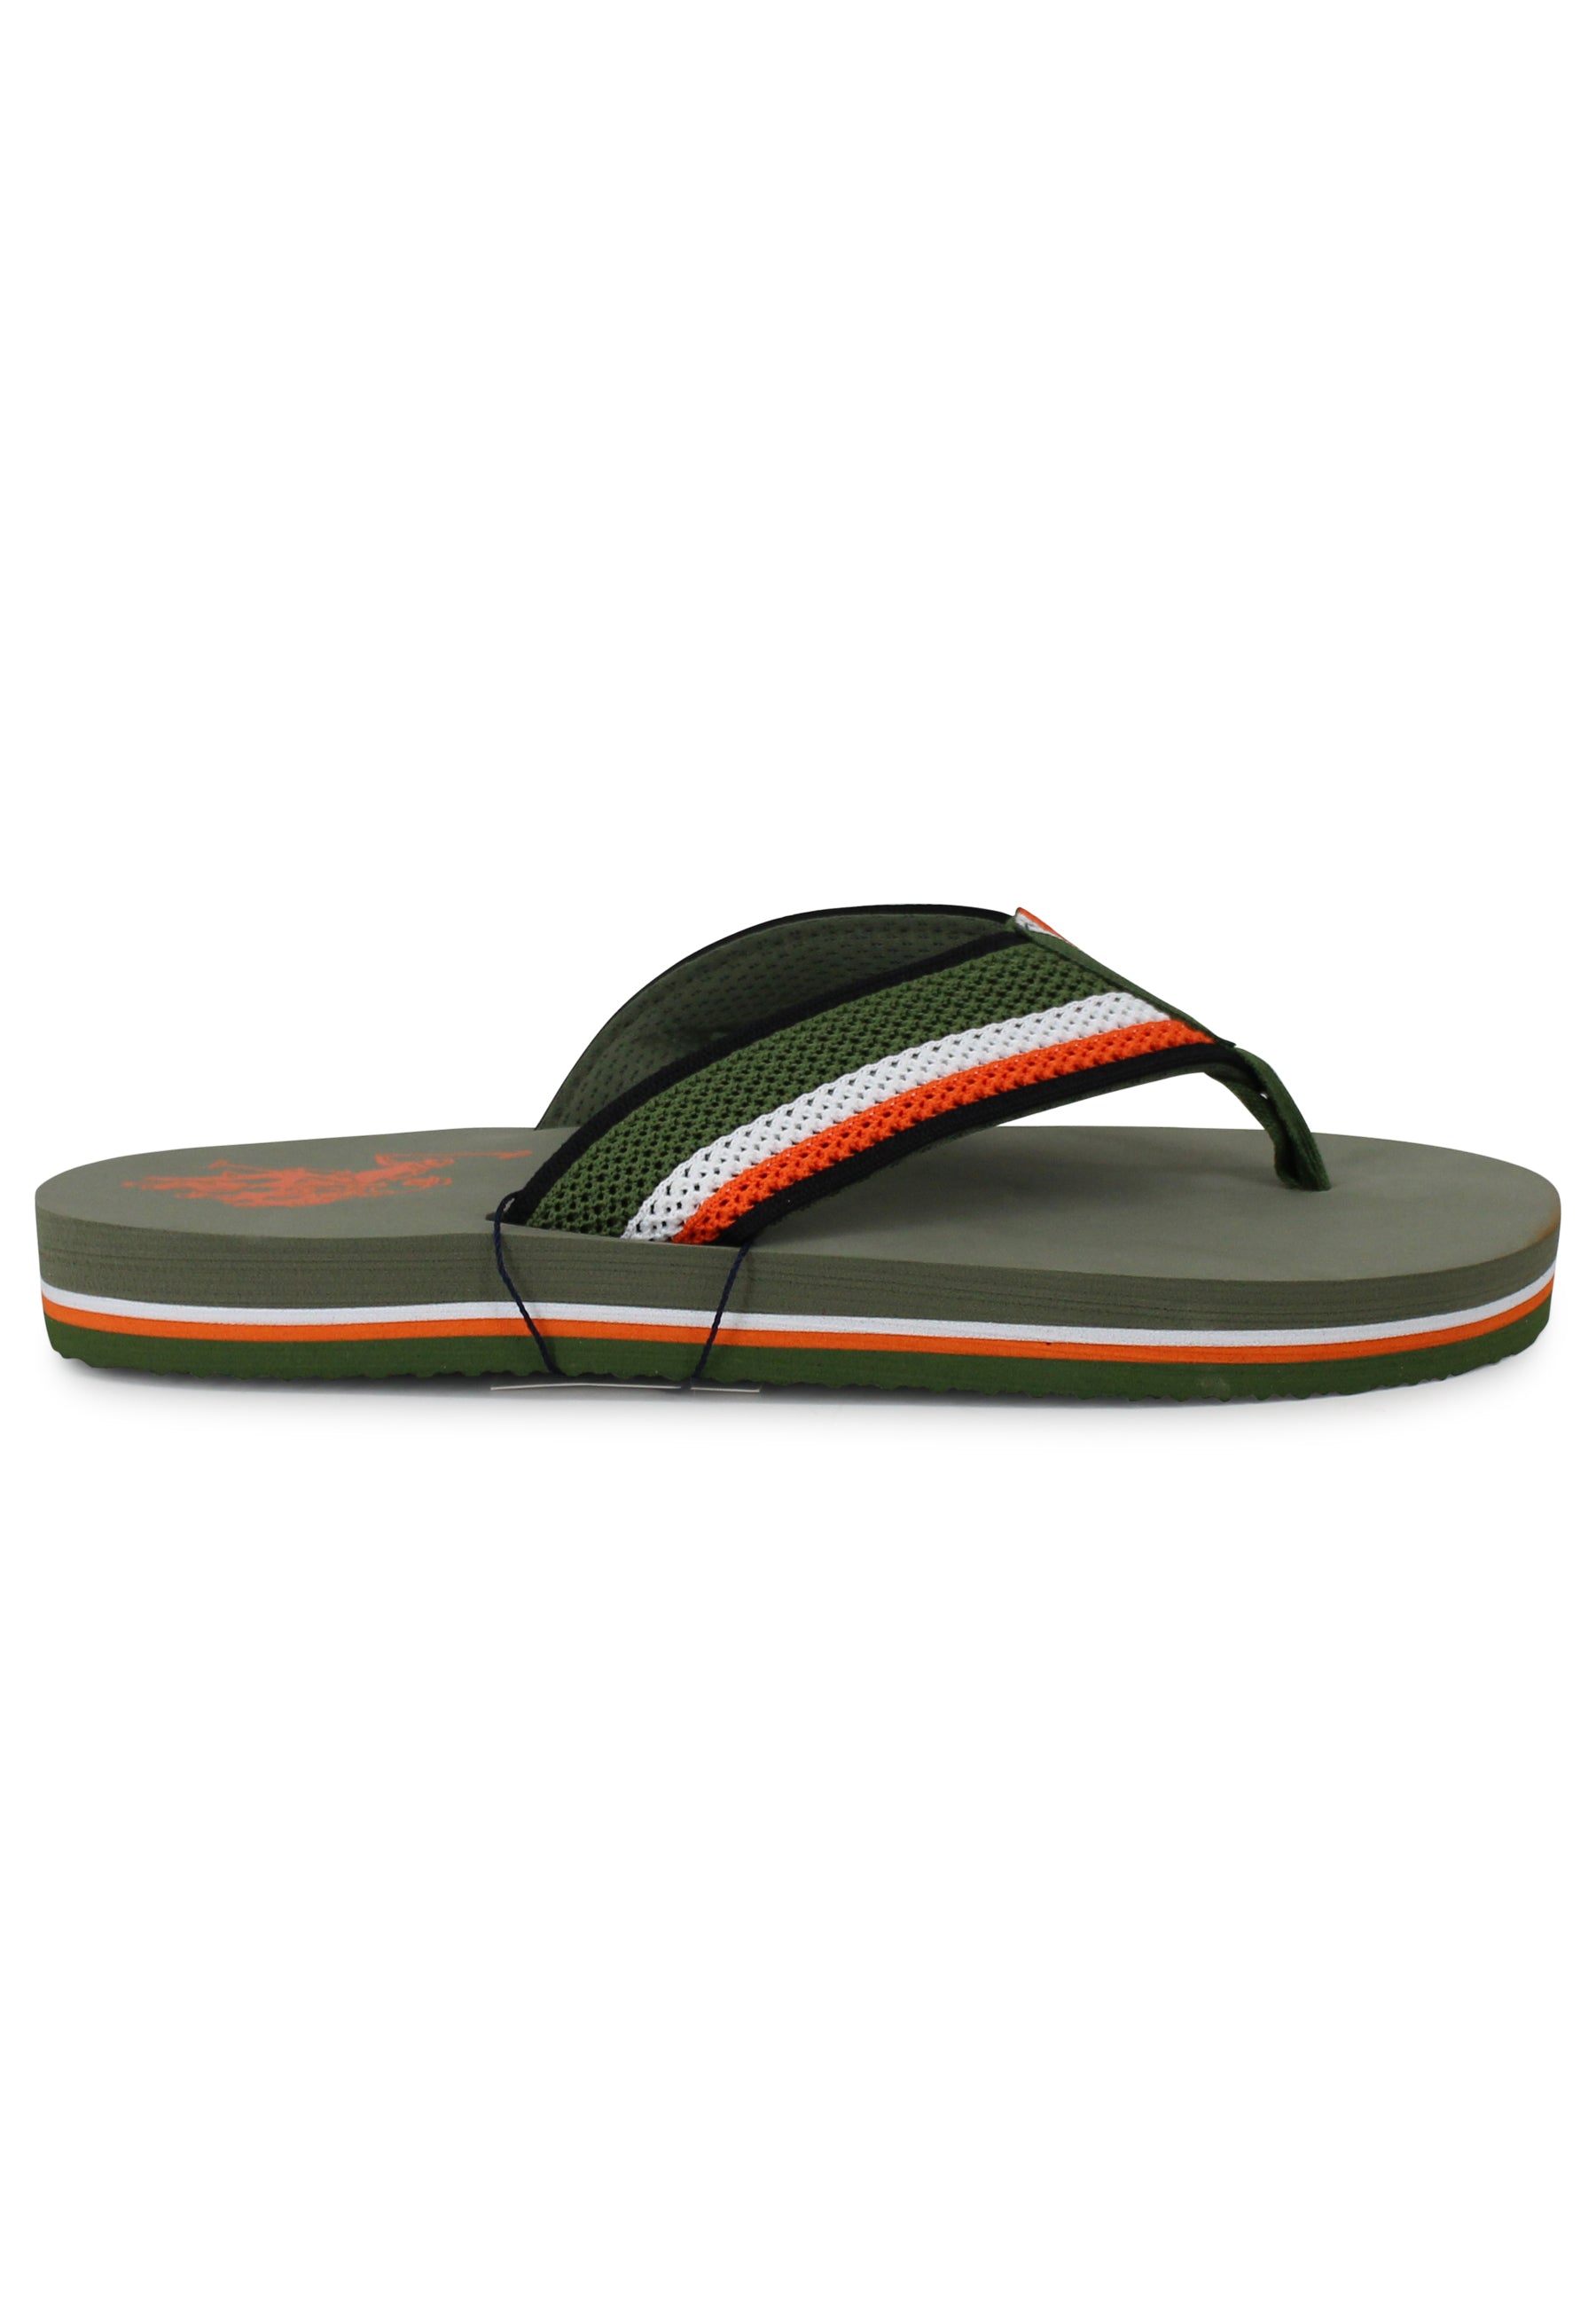 Men's flip flops in green fabric with light rubber sole